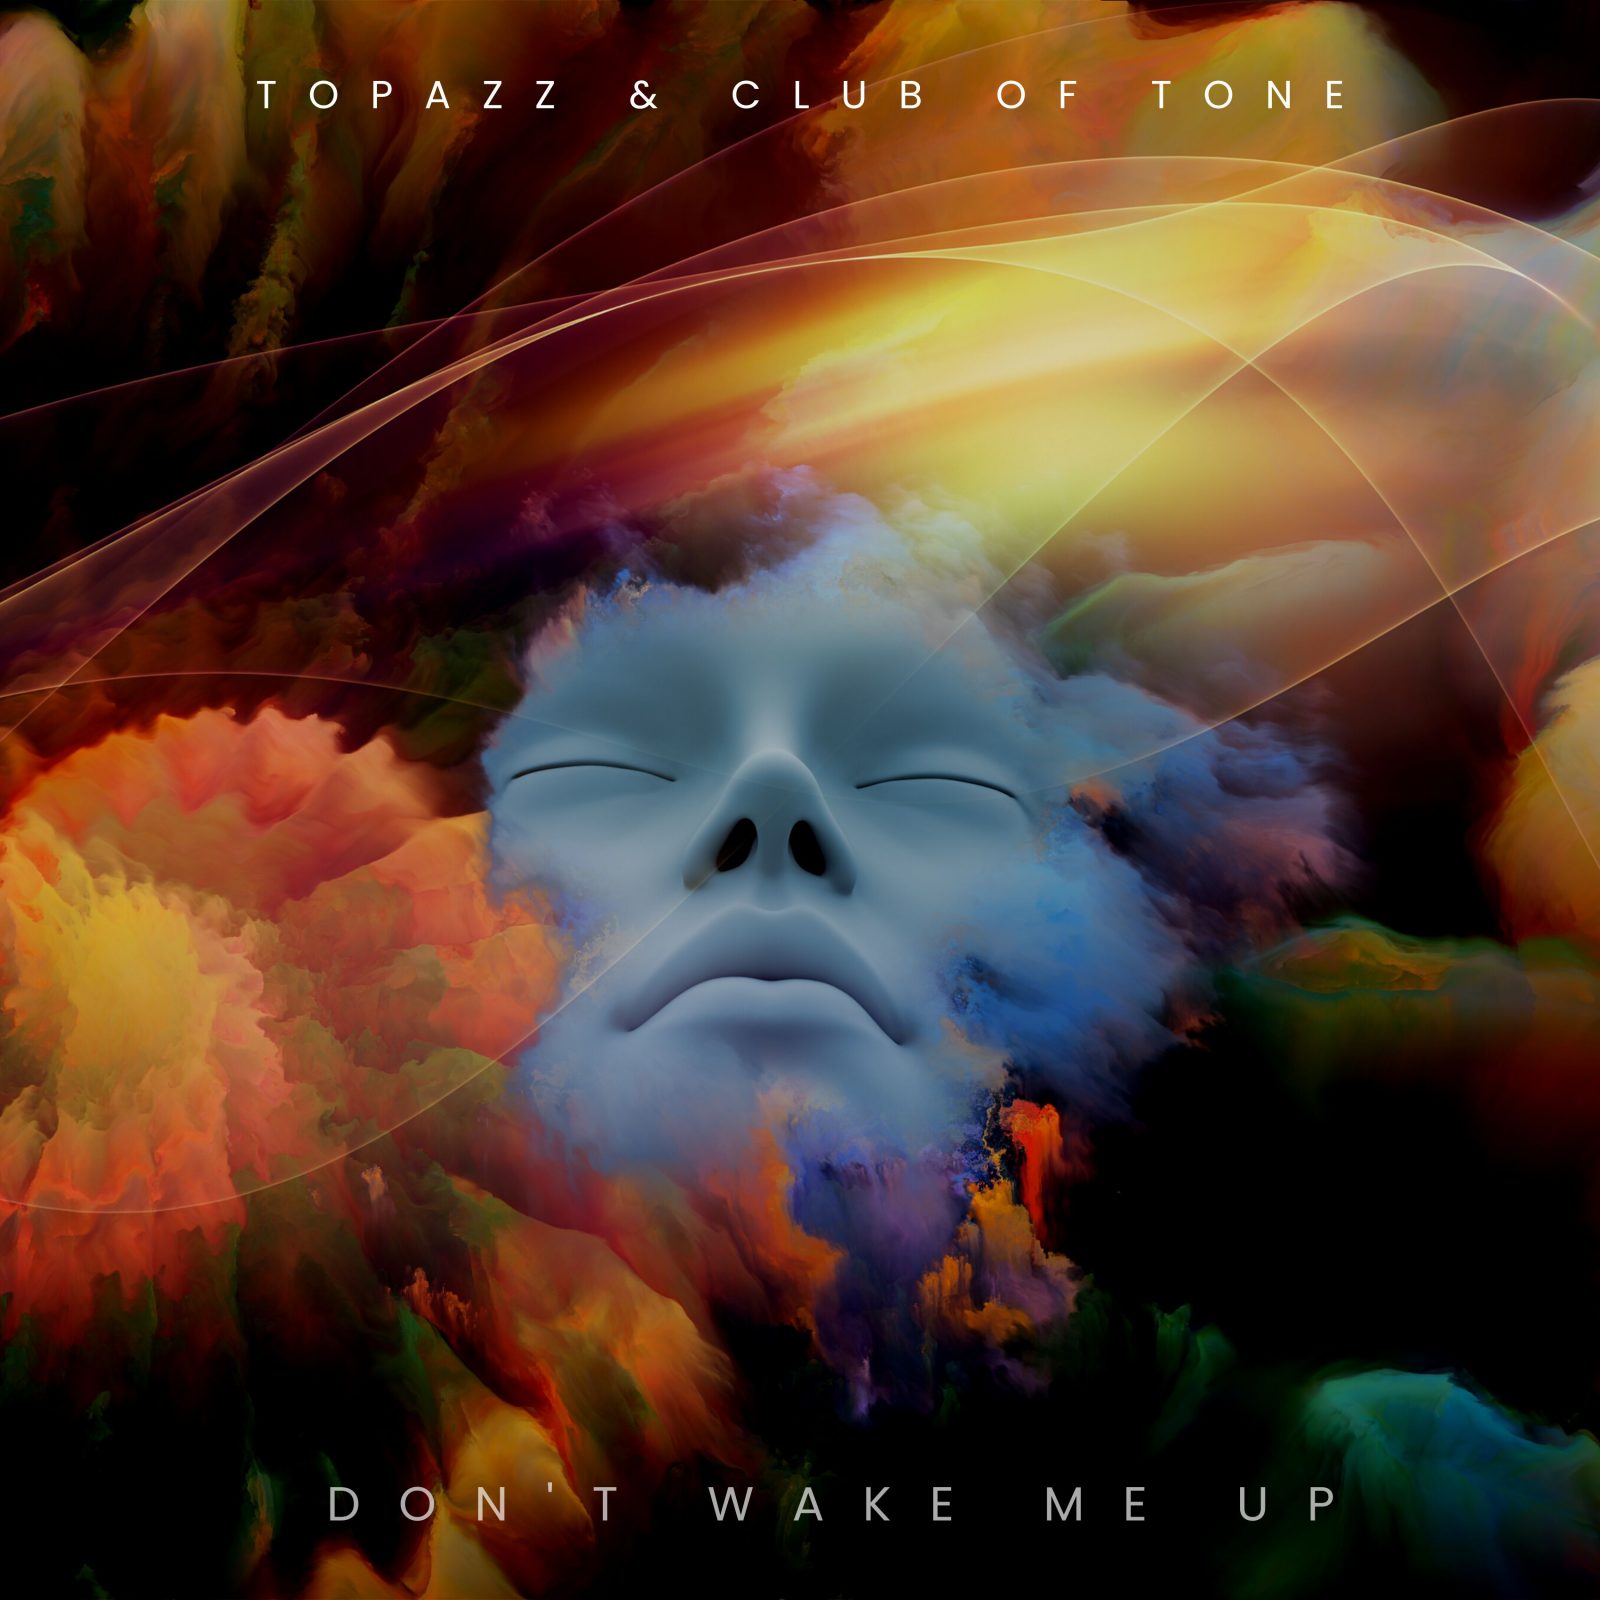 DON'T WAKE ME UP (Club of Tone Edit) by Topazz, Club of Tone